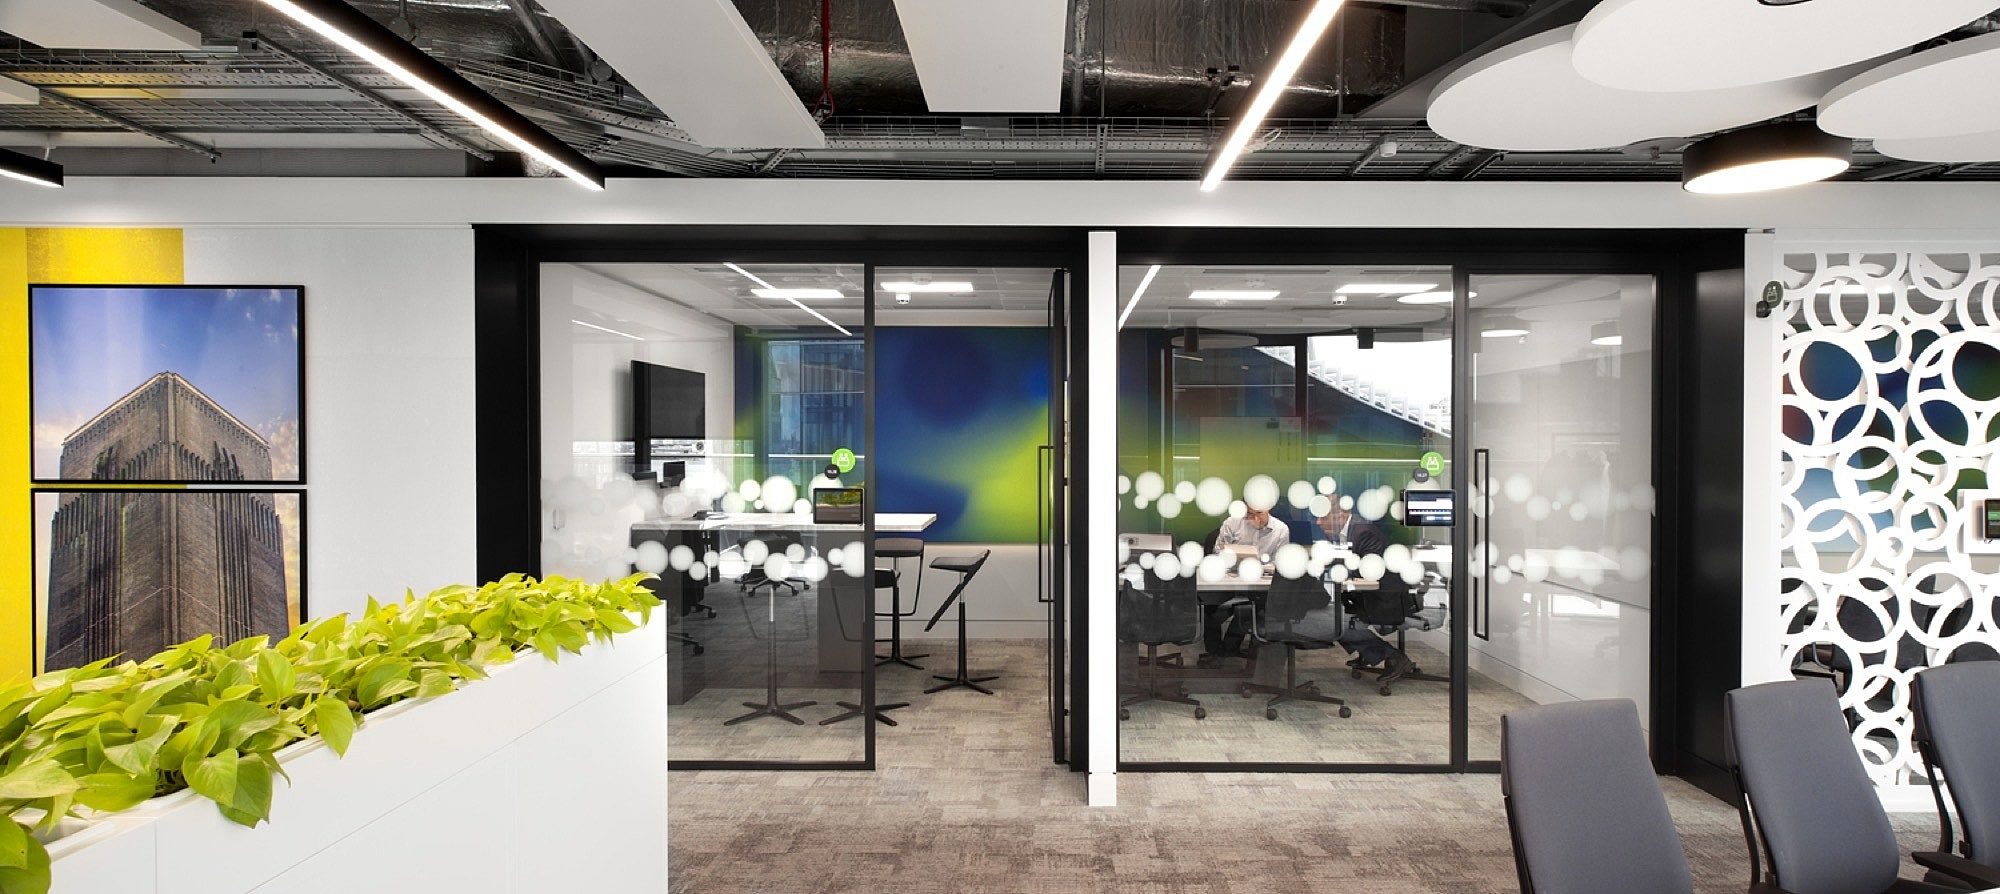 Deloitte's office fit out for wellbeing